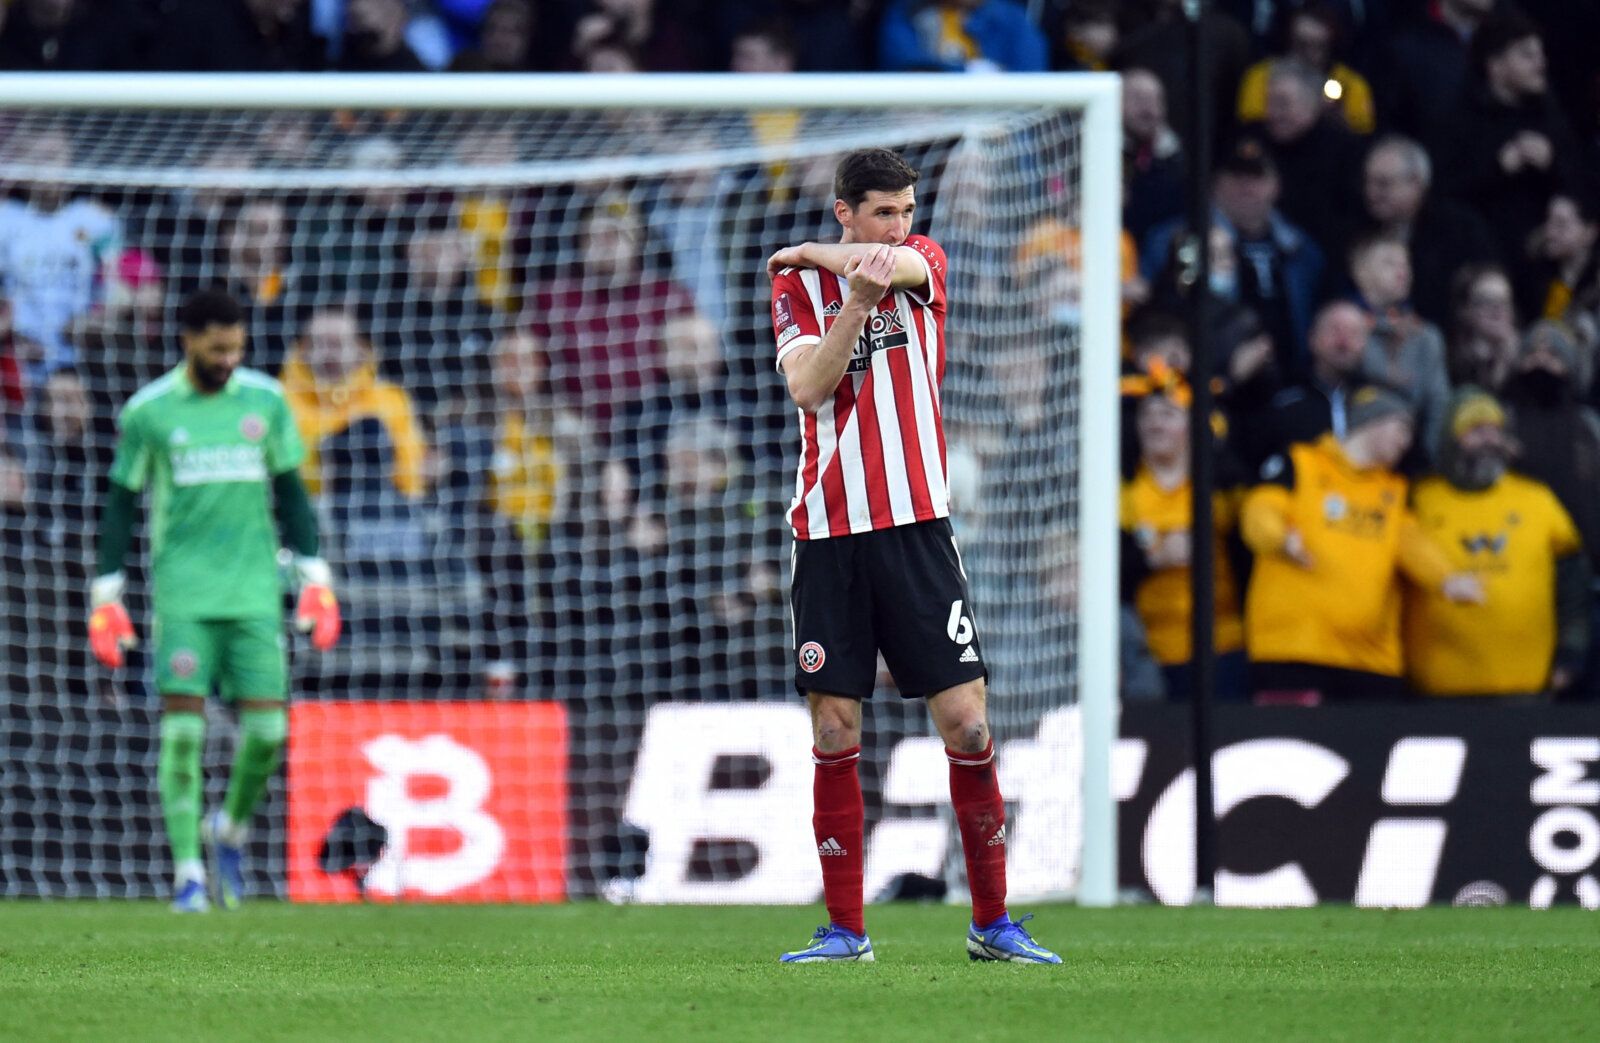 Soccer Football - FA Cup Third Round - Wolverhampton Wanderers v Sheffield United - Molineux Stadium, Wolverhampton, Britain - January 9, 2022 Sheffield United's Chris Basham looks dejected after Wolverhampton Wanderers' Nelson Semedo scores their second goal REUTERS/Peter Powell